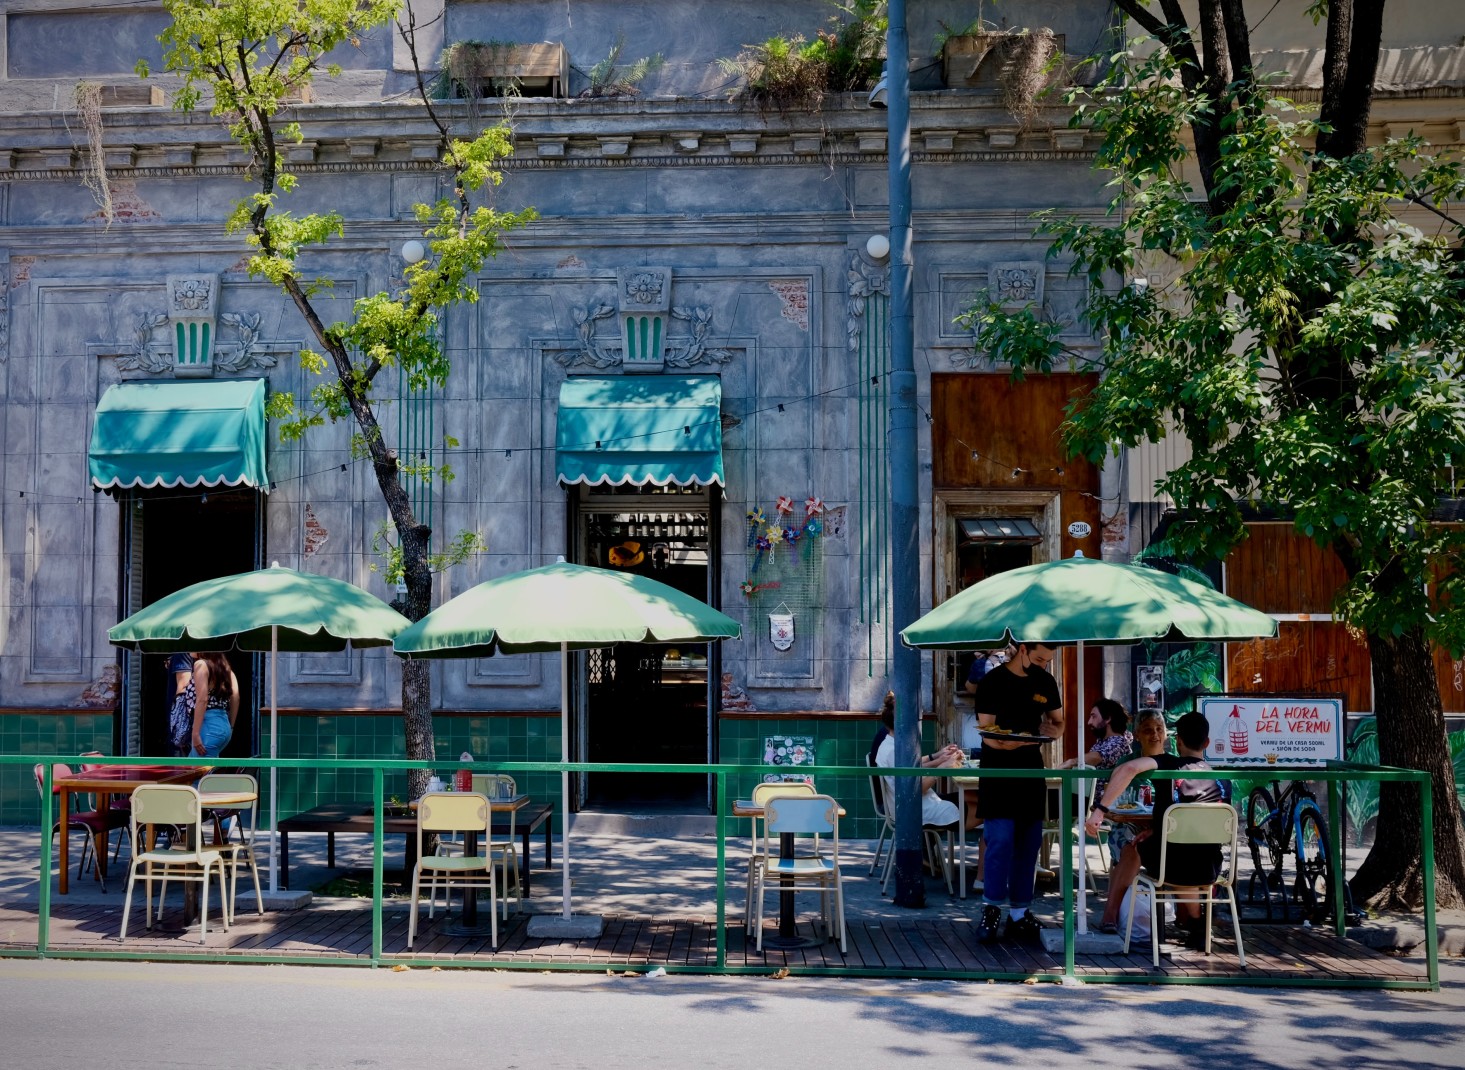 Green umbrellas and chairs on the sidewalk outside of a restaurant